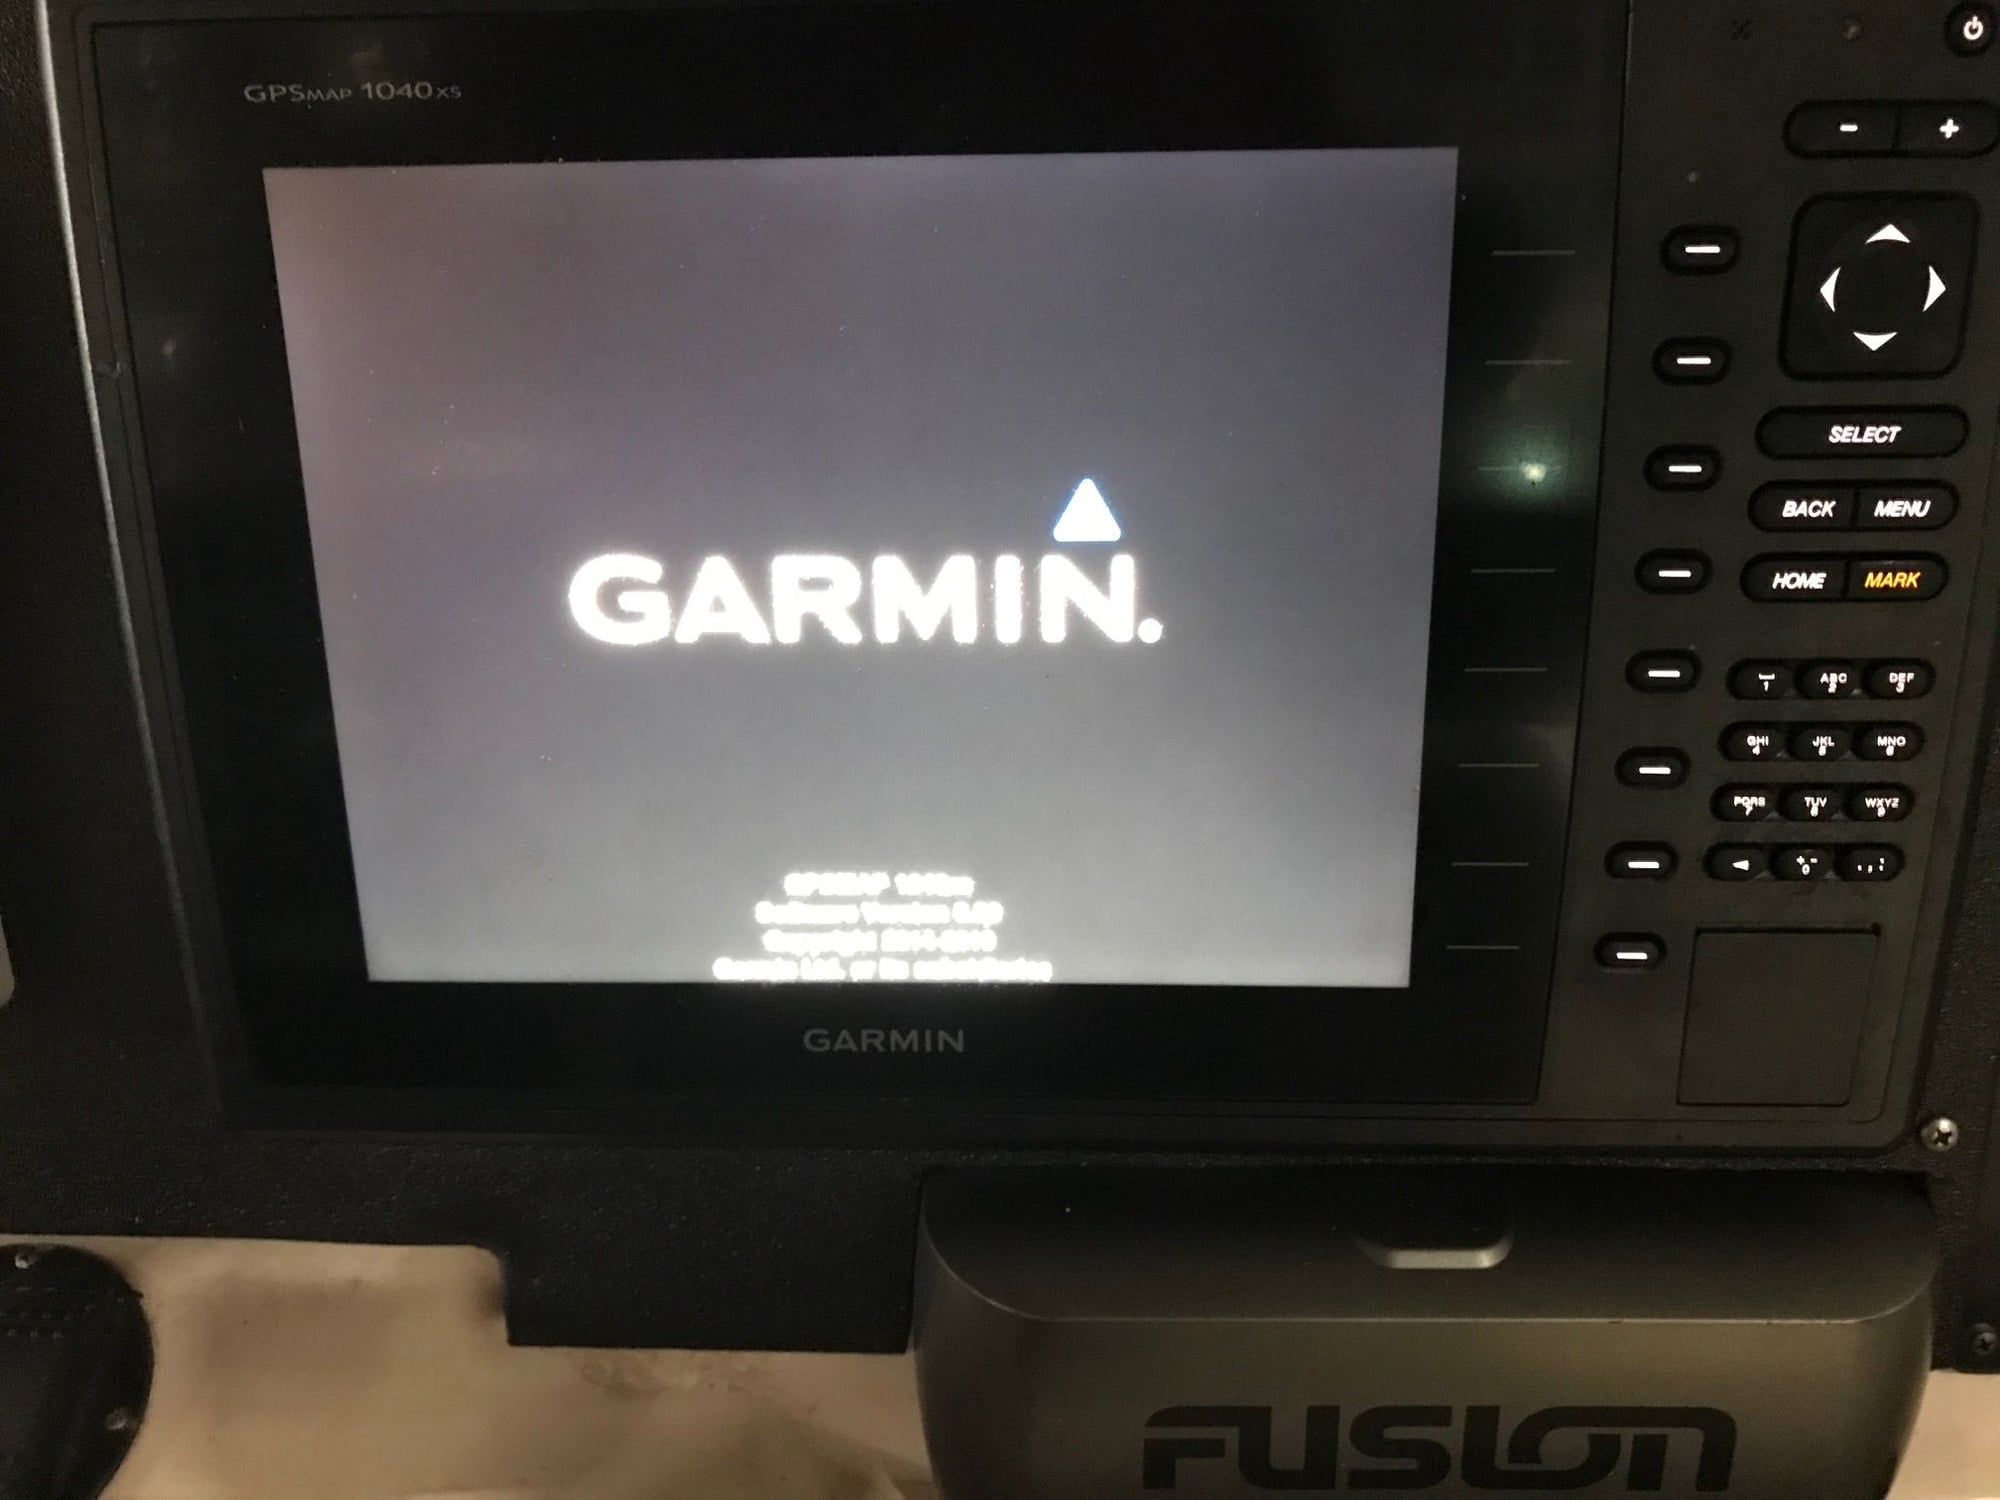 Garmin GPSMAP 1040xs - The Hull Truth - Boating and Fishing Forum